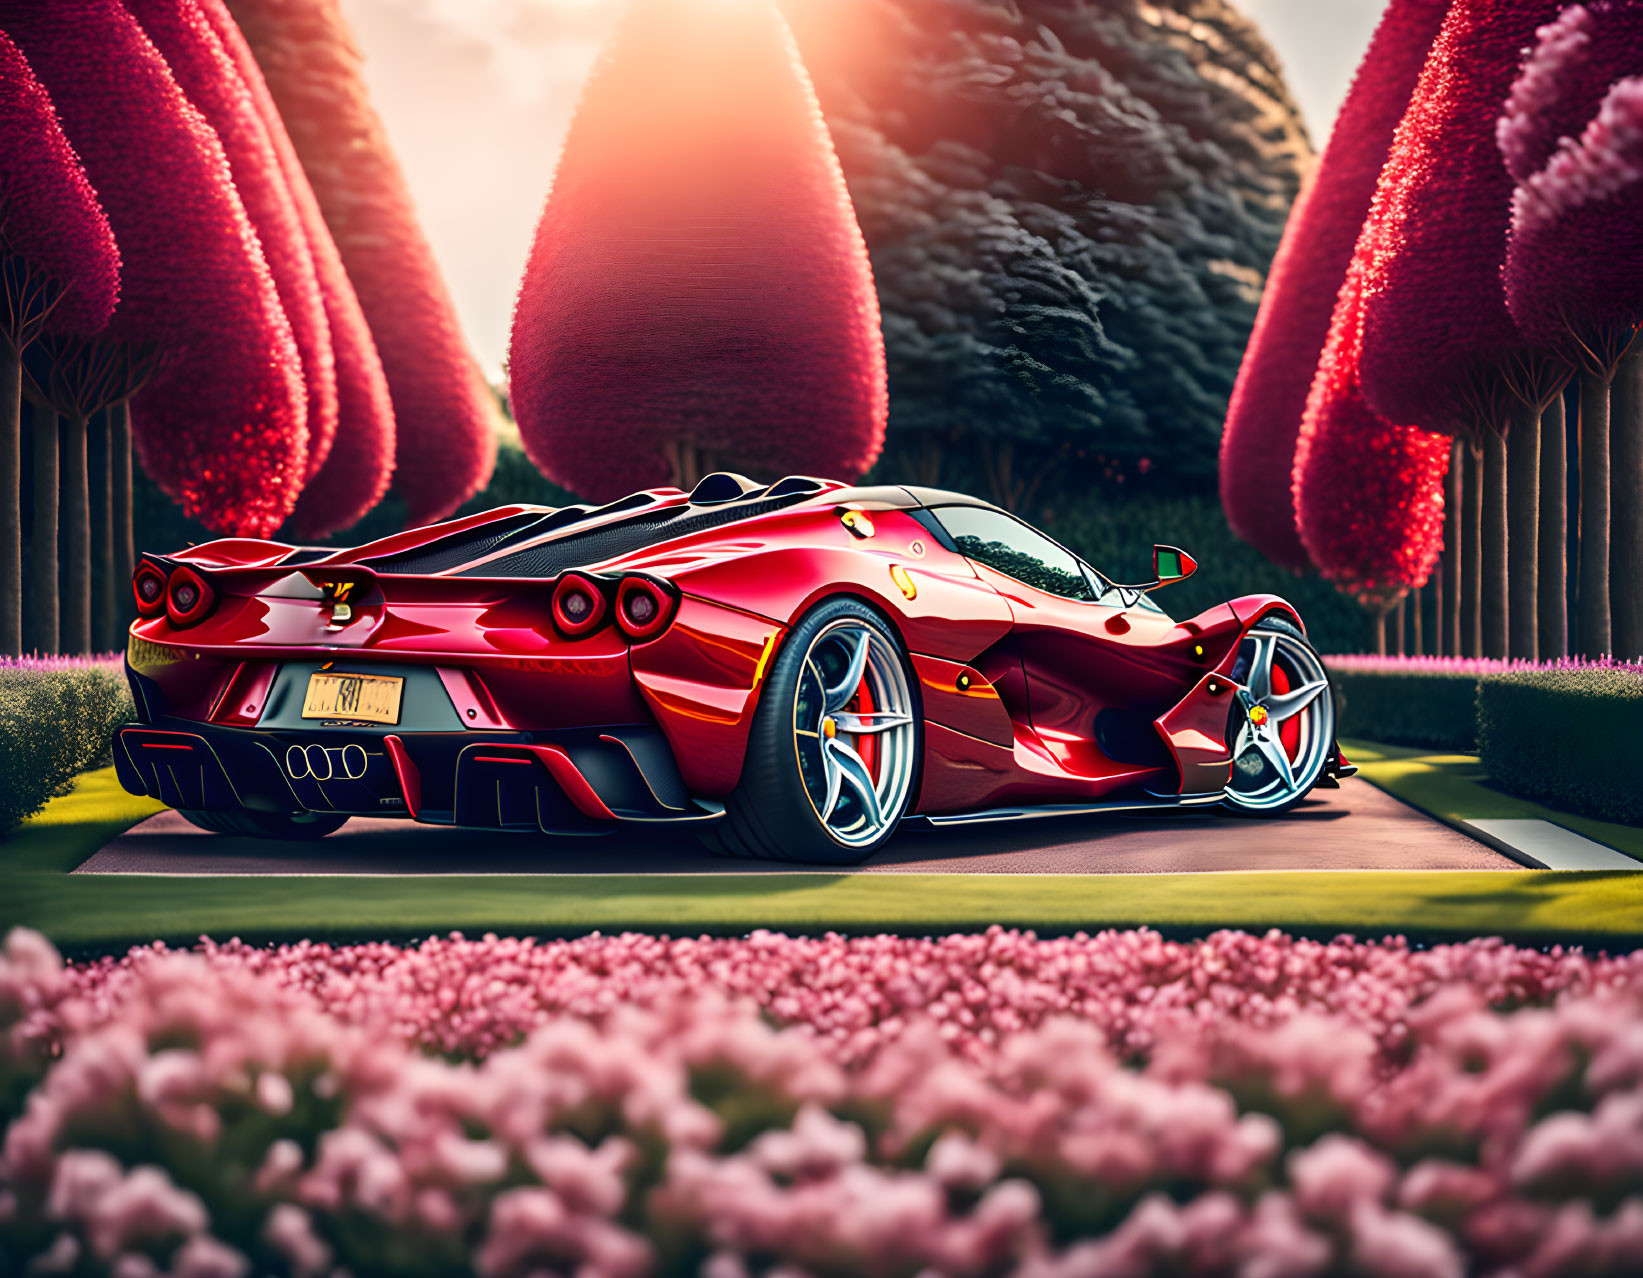 Red sports car parked among pink hedges and flowers on pathway under clear sky